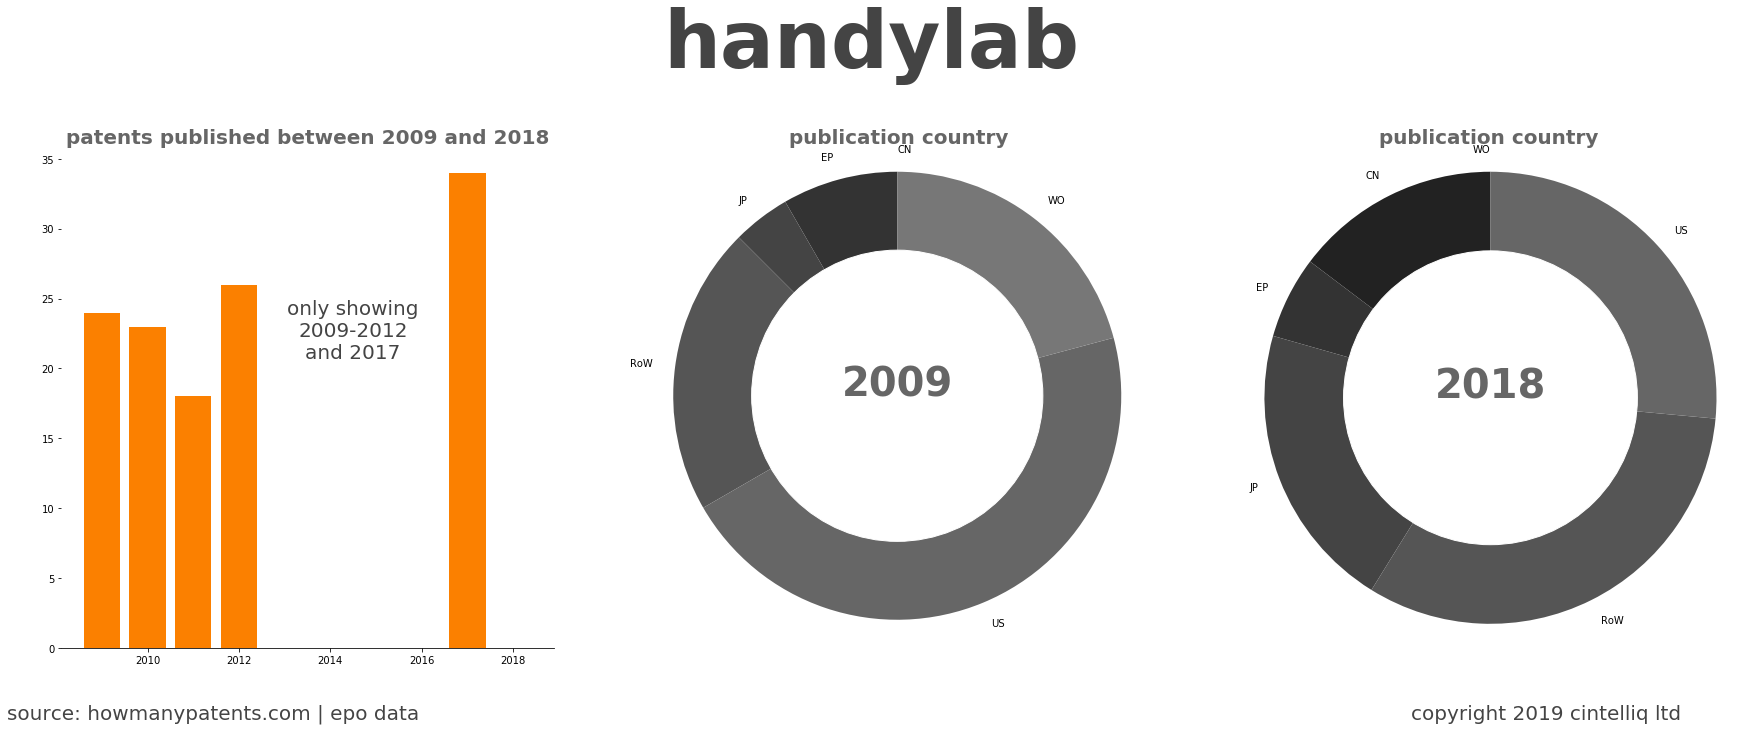 summary of patents for Handylab